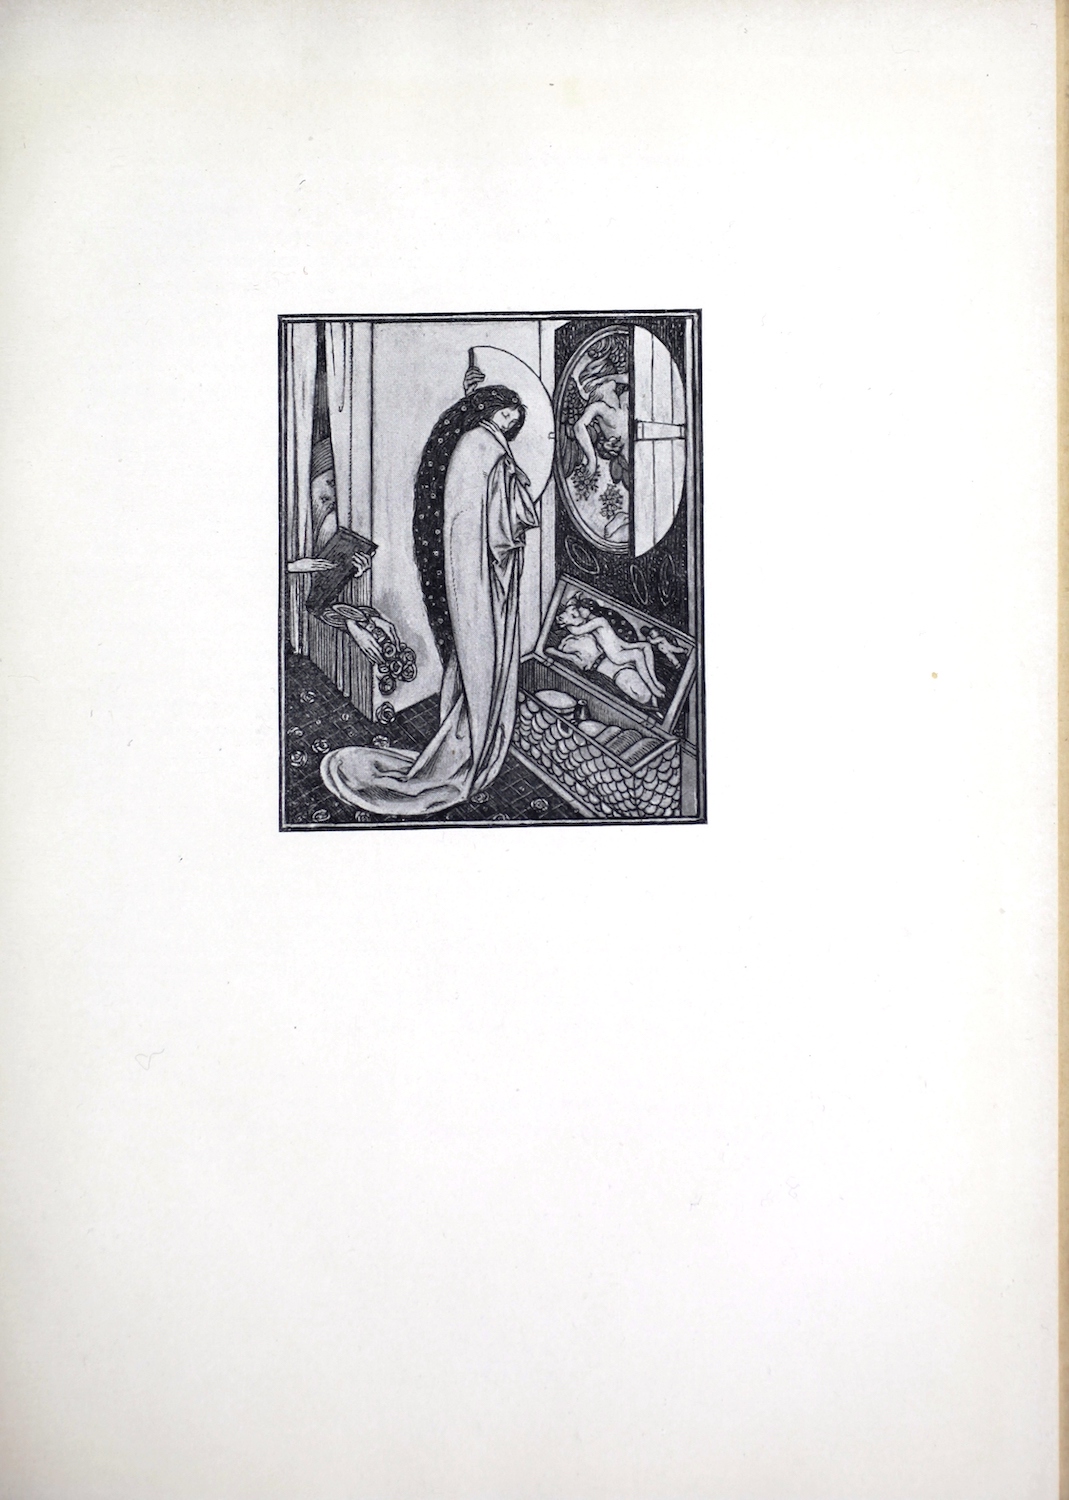 The small black-and-white image is centred on the page, framed by a double rule. The scene depicts a woman, the goddess Psyche, standing in a bedroom; behind her is a bedstead with hanging curtains, and in front of her is an open circular window, through which she can see a sleeping man carried by a flying eagle. She is clutching the window shutter with her eyes closed, and her head is tilted down, away from the image of the man. At Psyche’s feet is an open trunk, filled with small objects. The inside lid of the truck features the image of a nude woman lying on her back on top of a white bull, with Cupid flying above her bent knees. This may reference the myth of Europa being abducted by Zeus in the form of a bull. Psyche’s hair is long and has flowers in it. She wears a long robe the flows onto the tiled floor. Behind her two pairs of hands appear. One plays a small stringed instrument (possibly a lyre) and the other pours roses onto the floor by Psyche’s feet. Both pairs of hands emerge from behind the bed curtains.